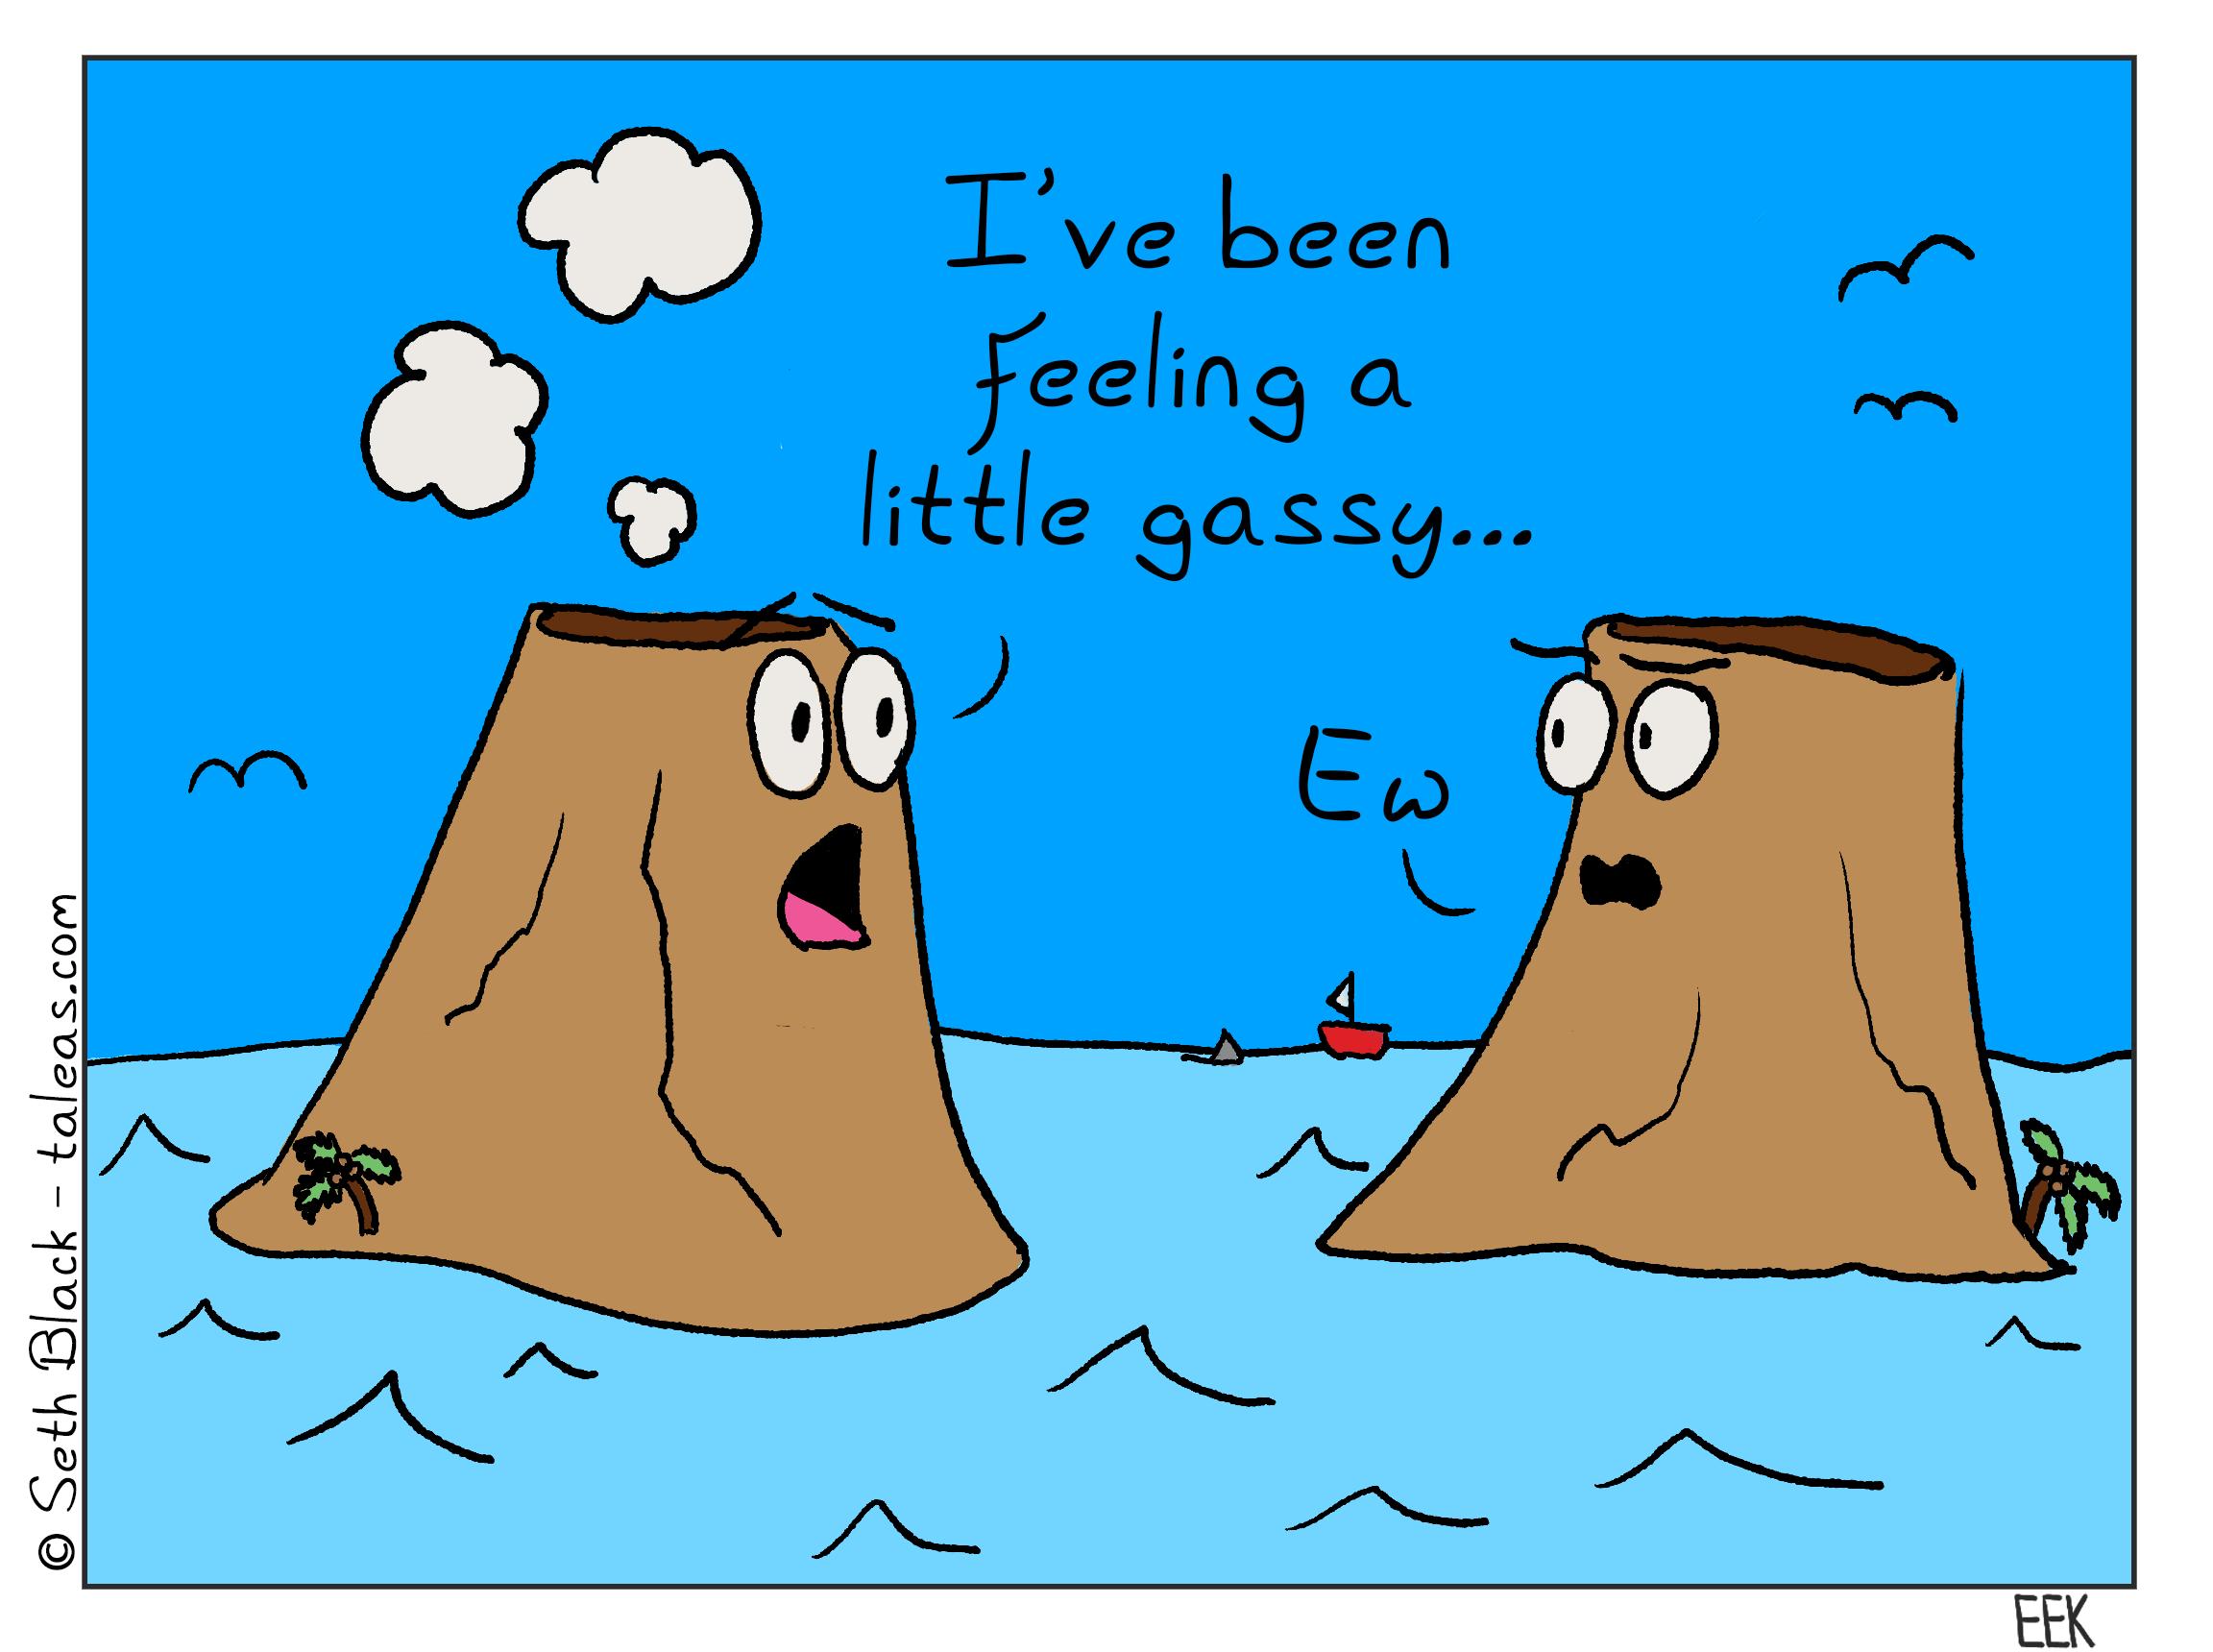 Two volcanoes are situated next to each other in the ocean. One has puffs of gas emitting from the caldera, and states, “I’ve been feeling a lil gassy lately.”